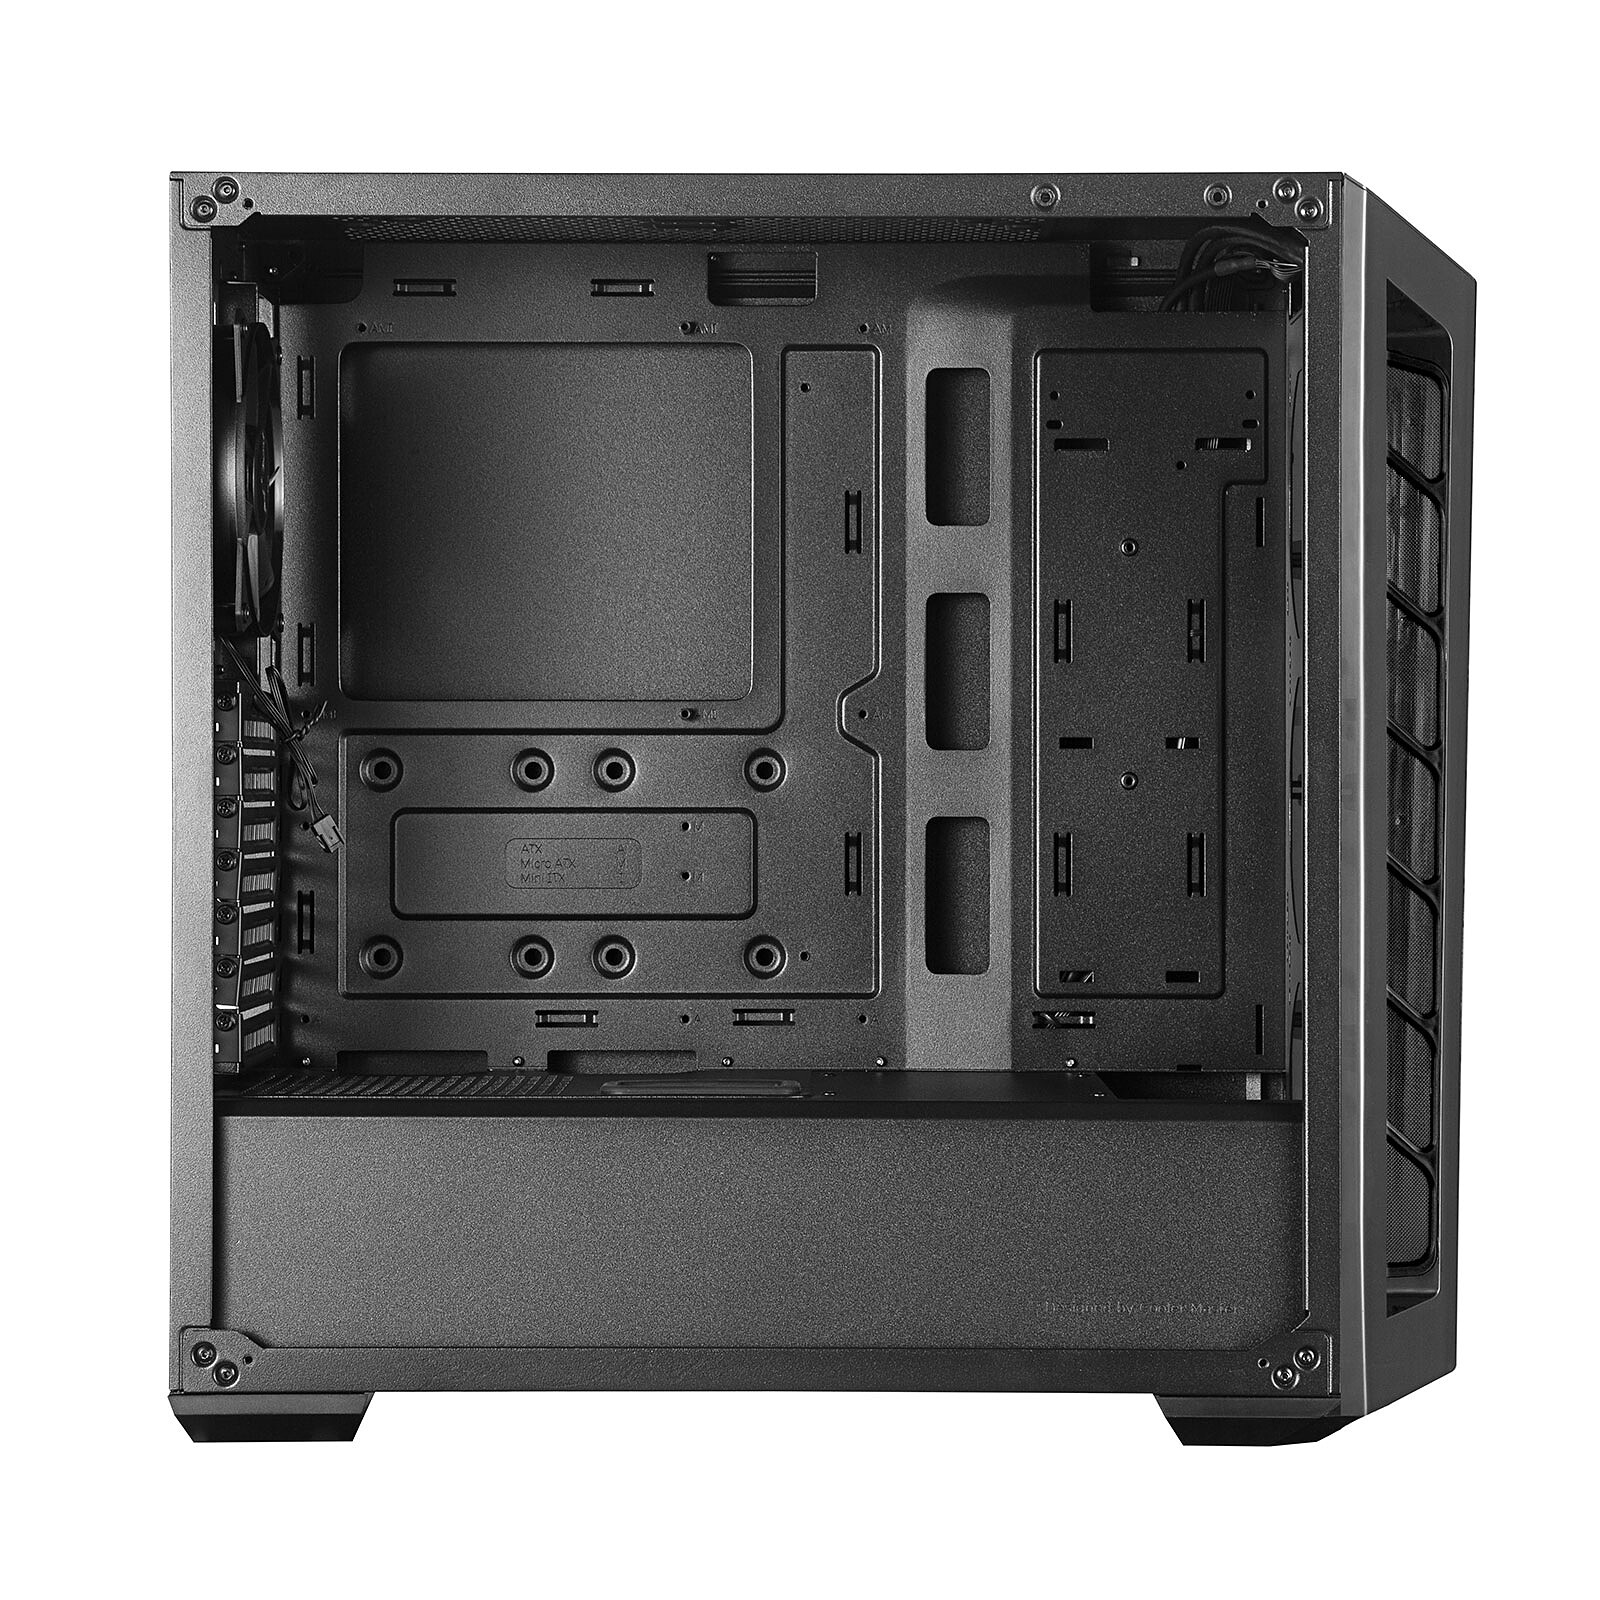 Cooler Master MasterBox MB520 (Black) - PC cases - LDLC 3-year warranty ...